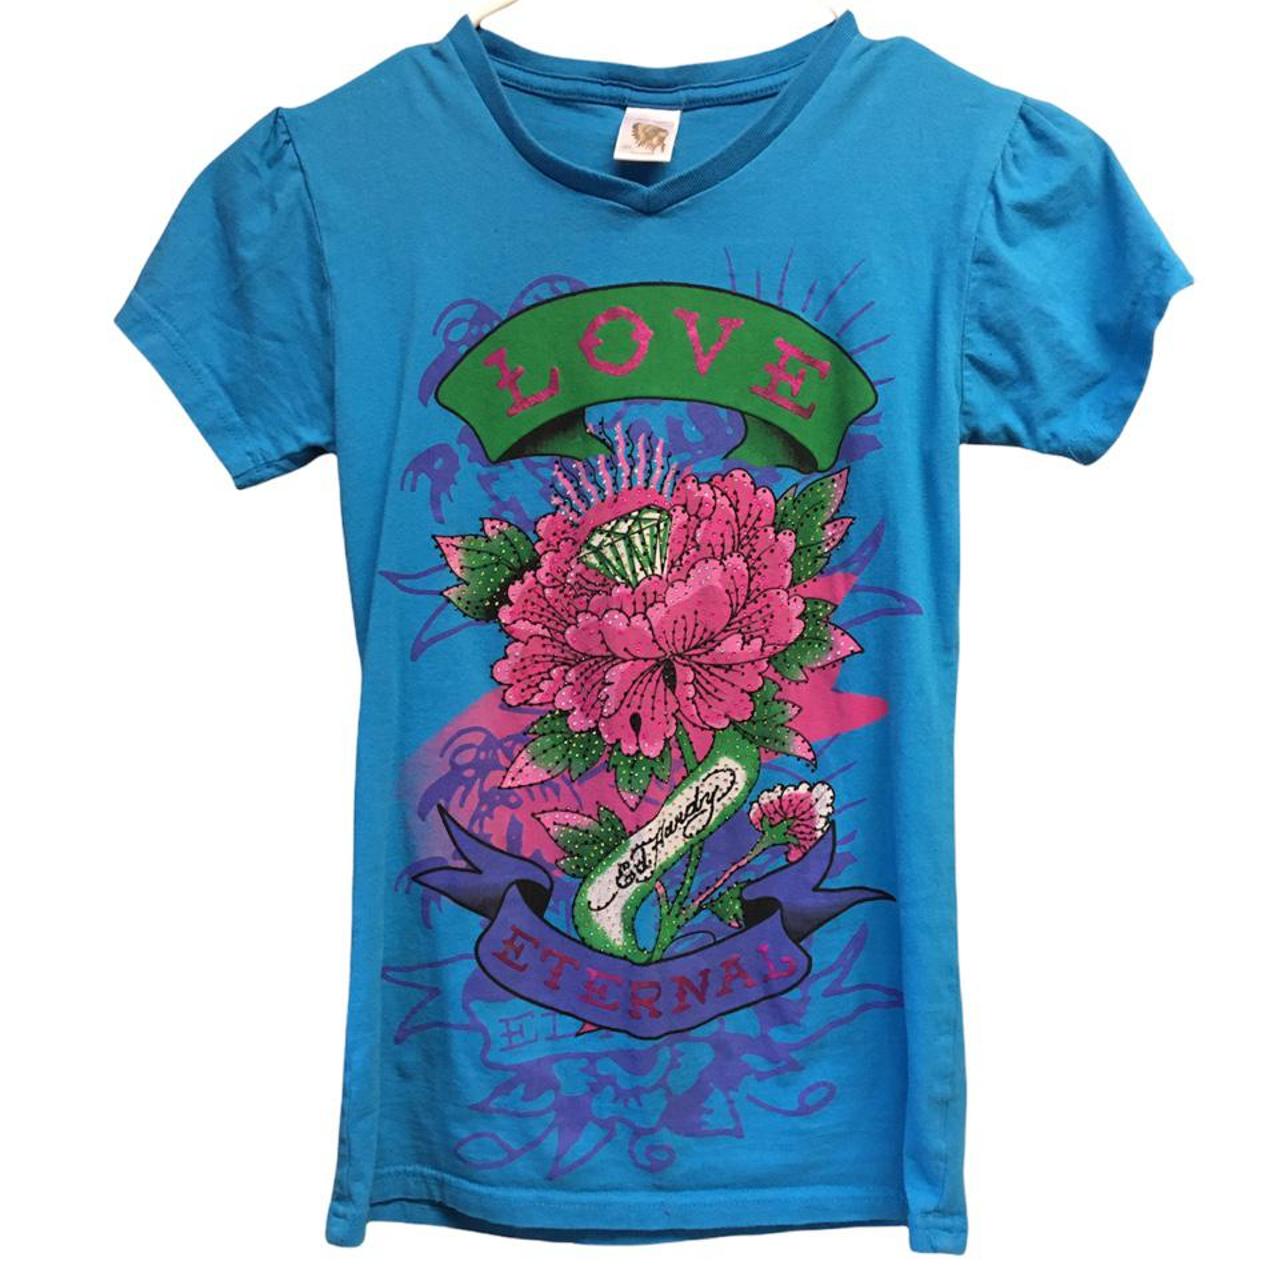 Product Image 1 - Ed hardy kids top! Would